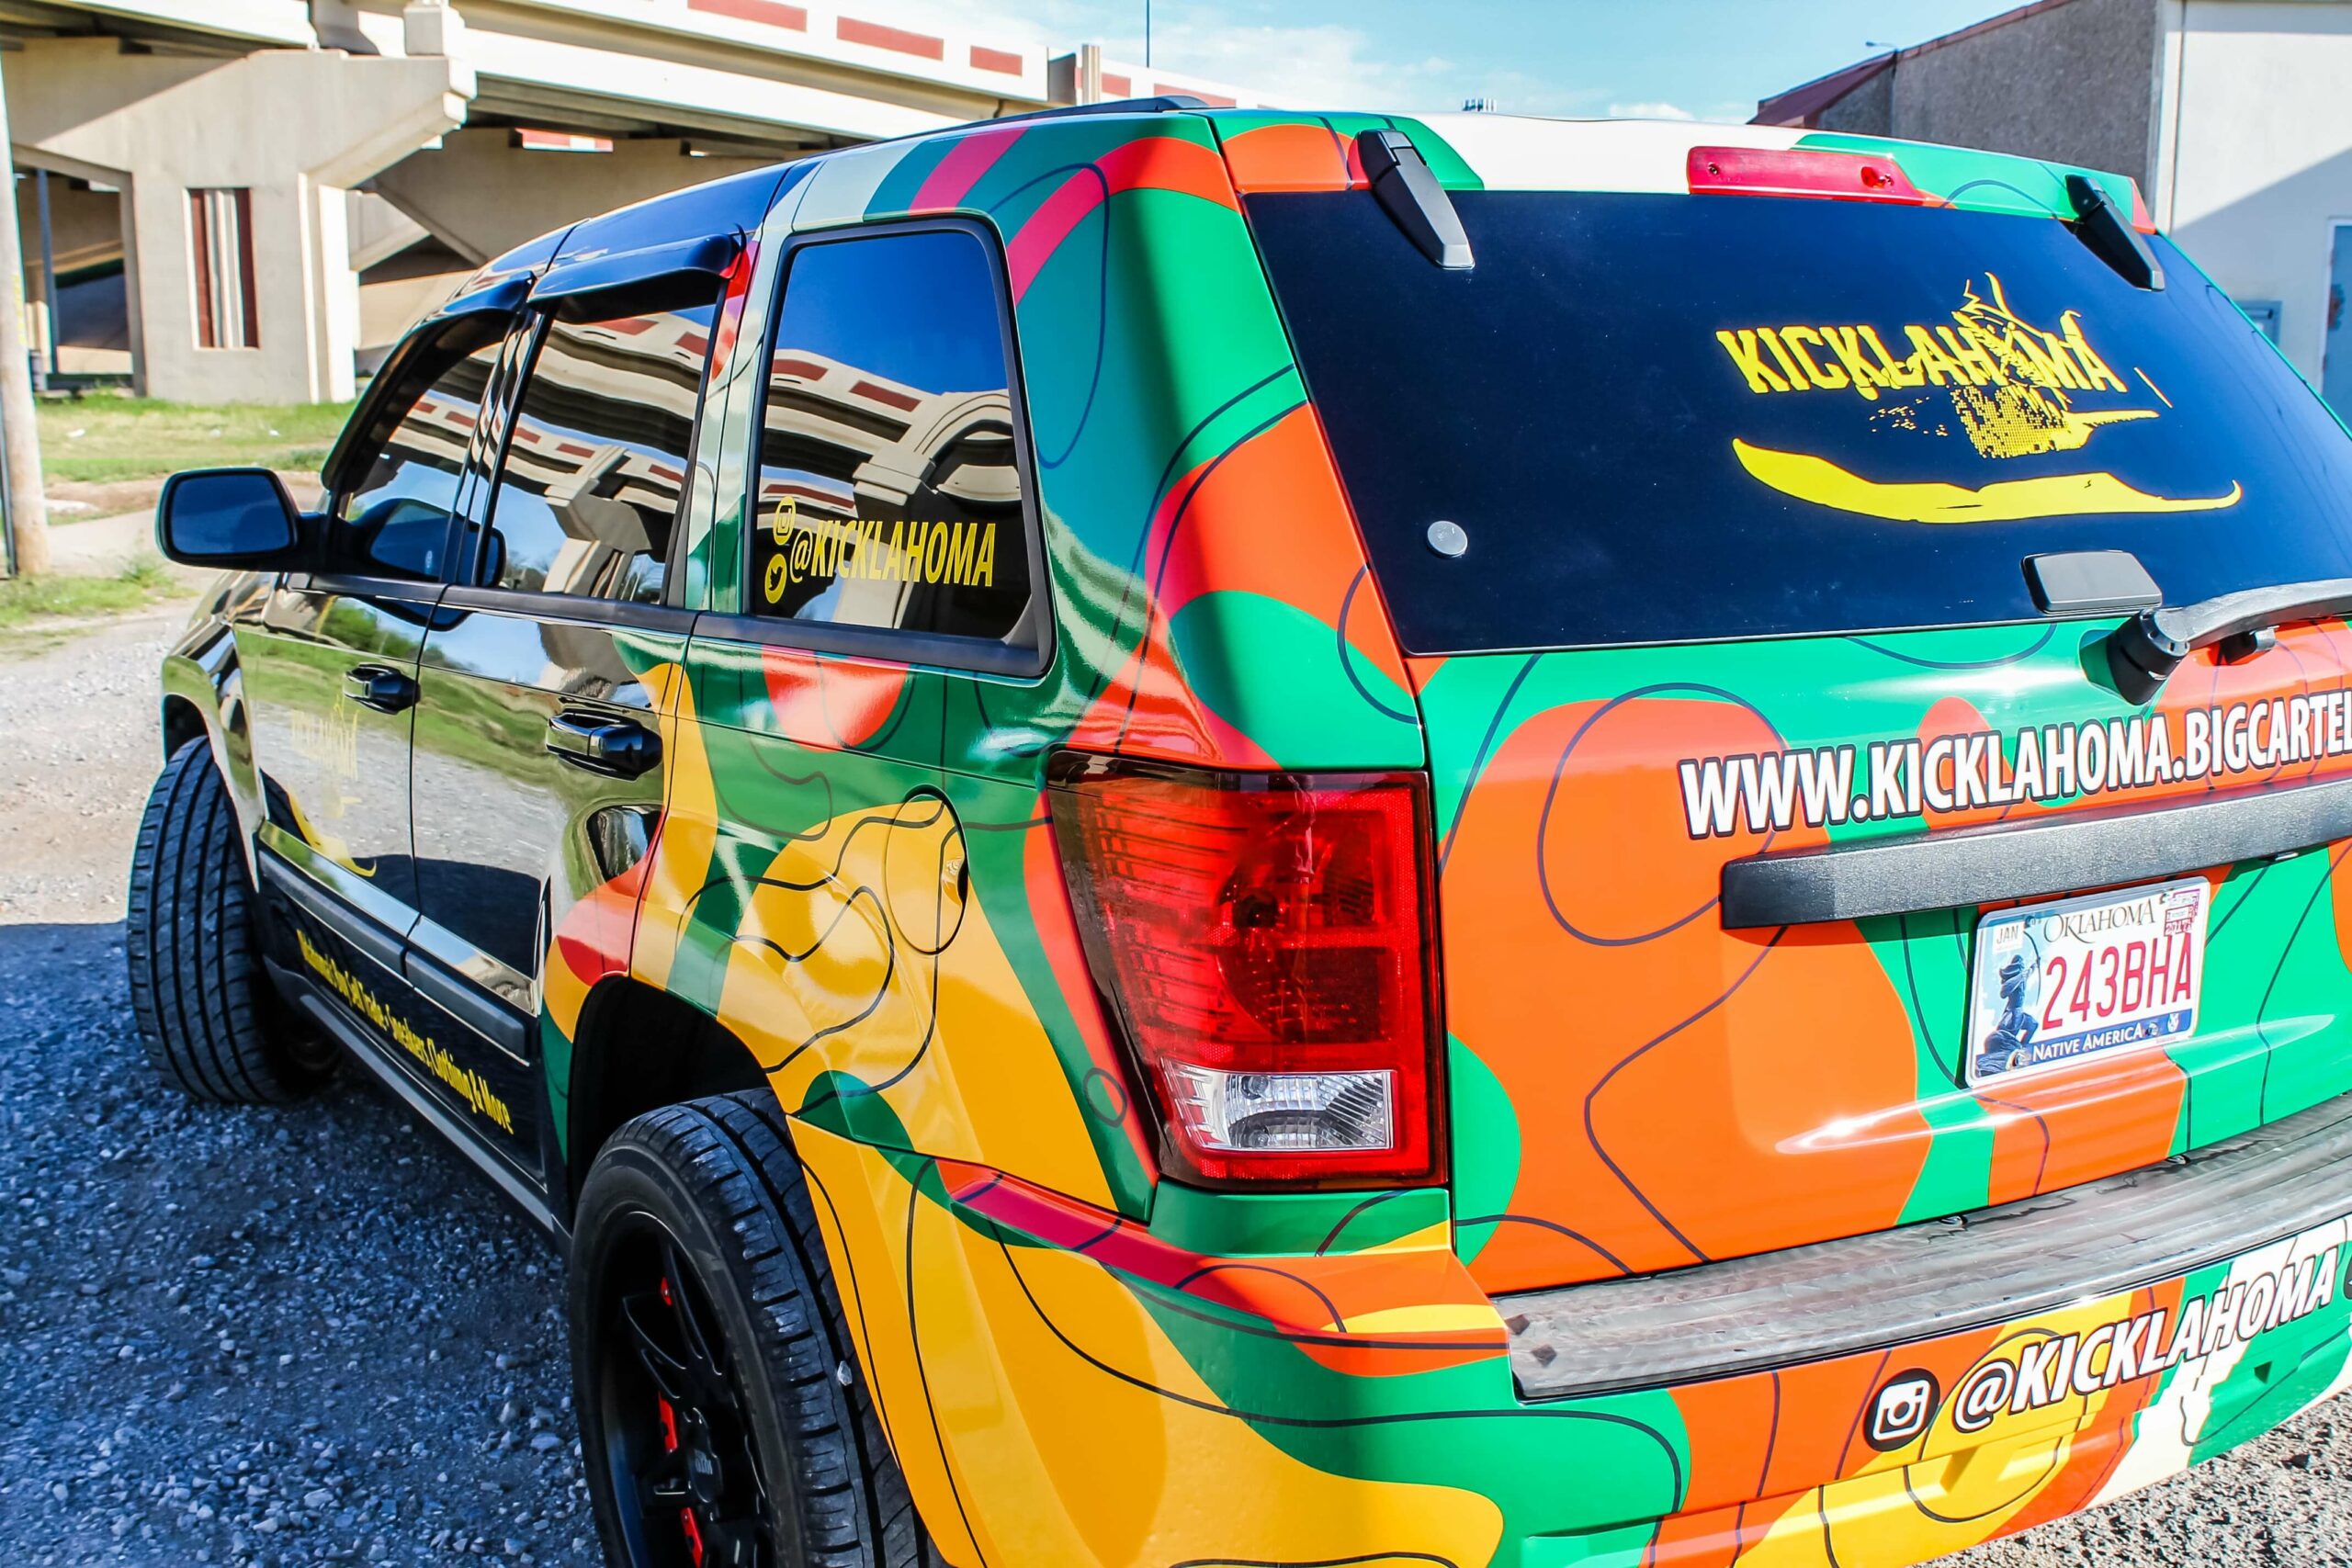 Side view of colorful Kicklahoma vinyl car wrapped at outdoors